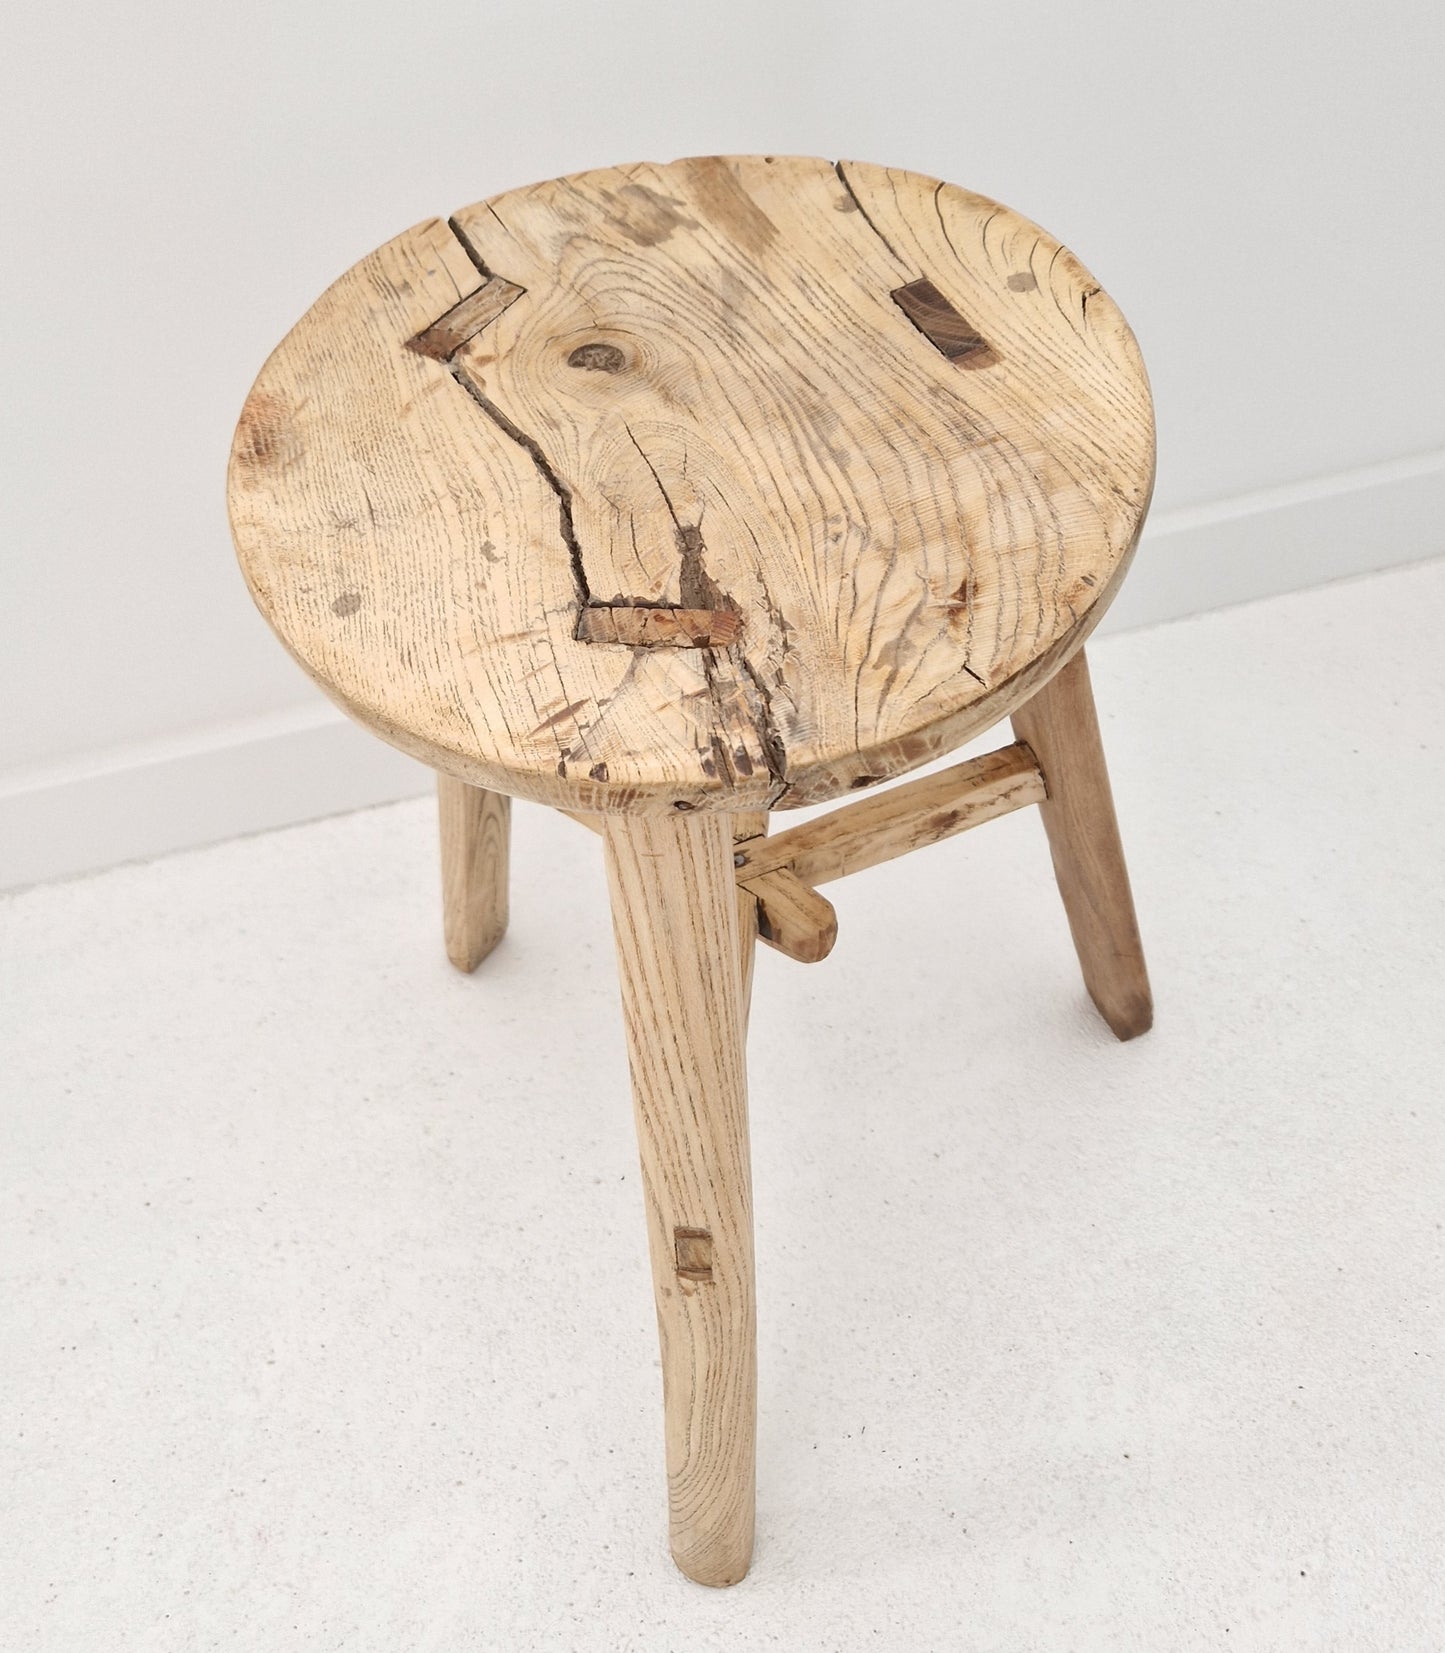 Old round wooden stool #2